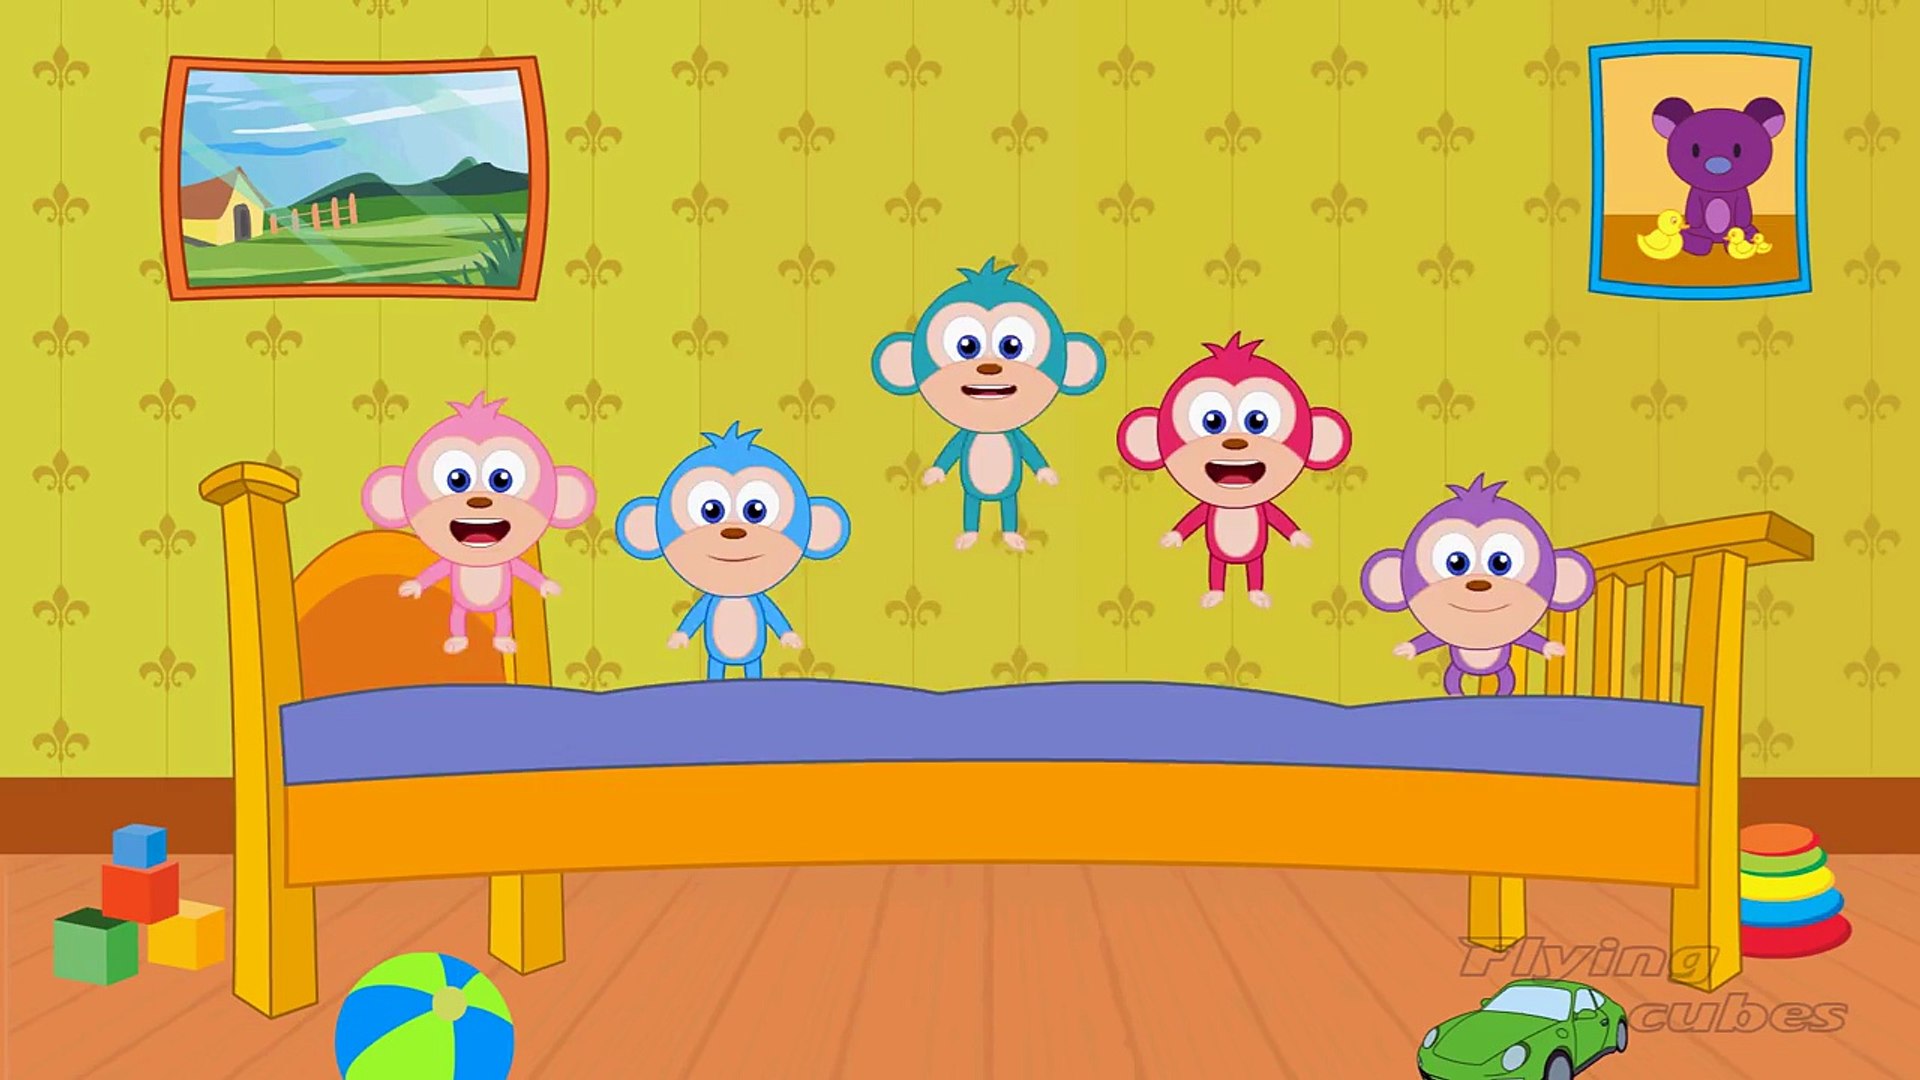 Five Little Monkeys Jumping On The Bed Nursery Rhyme By FLYING CUBES -  Dailymotion Video